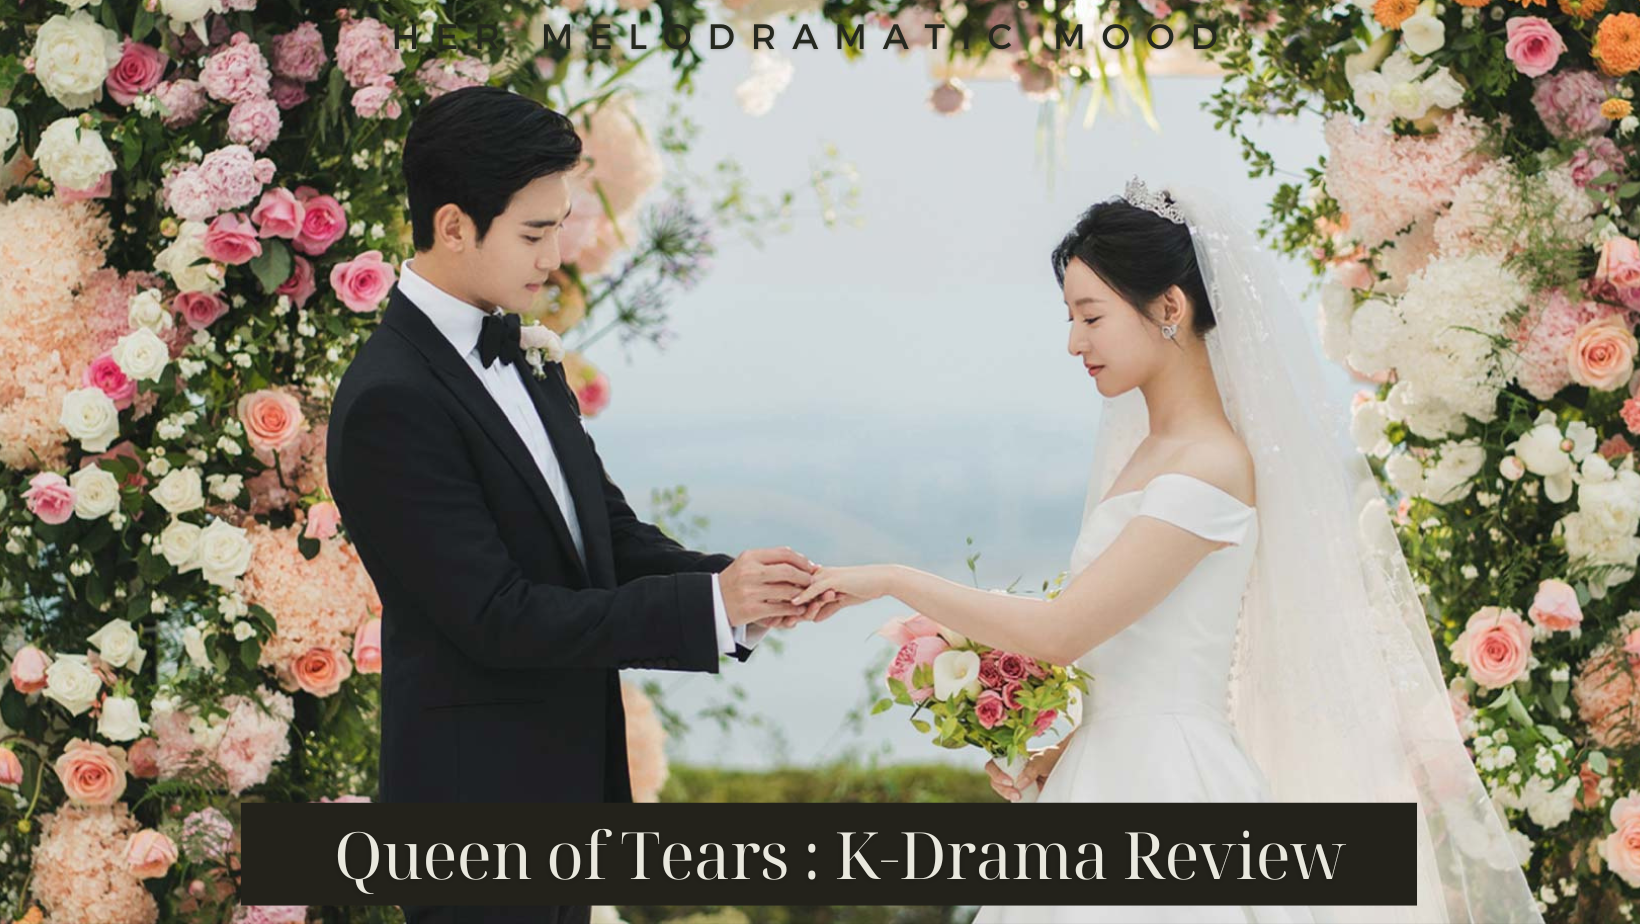 Queen of Tears K-Drama Review